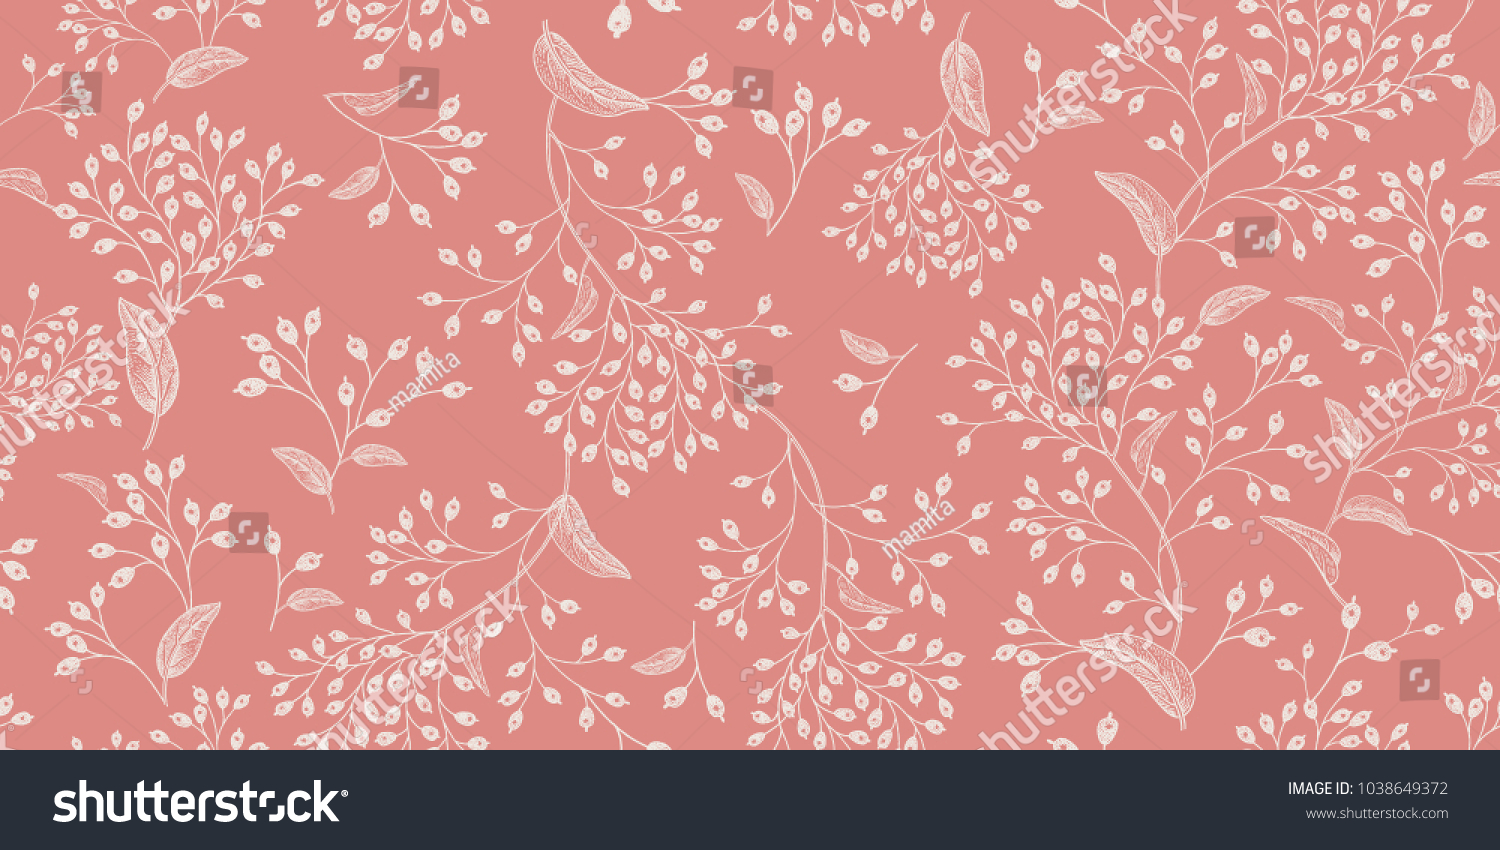 Floral vintage seamless pattern. Pink and white. Oriental style. Vector illustration art. For design textiles, paper, wallpaper. #1038649372